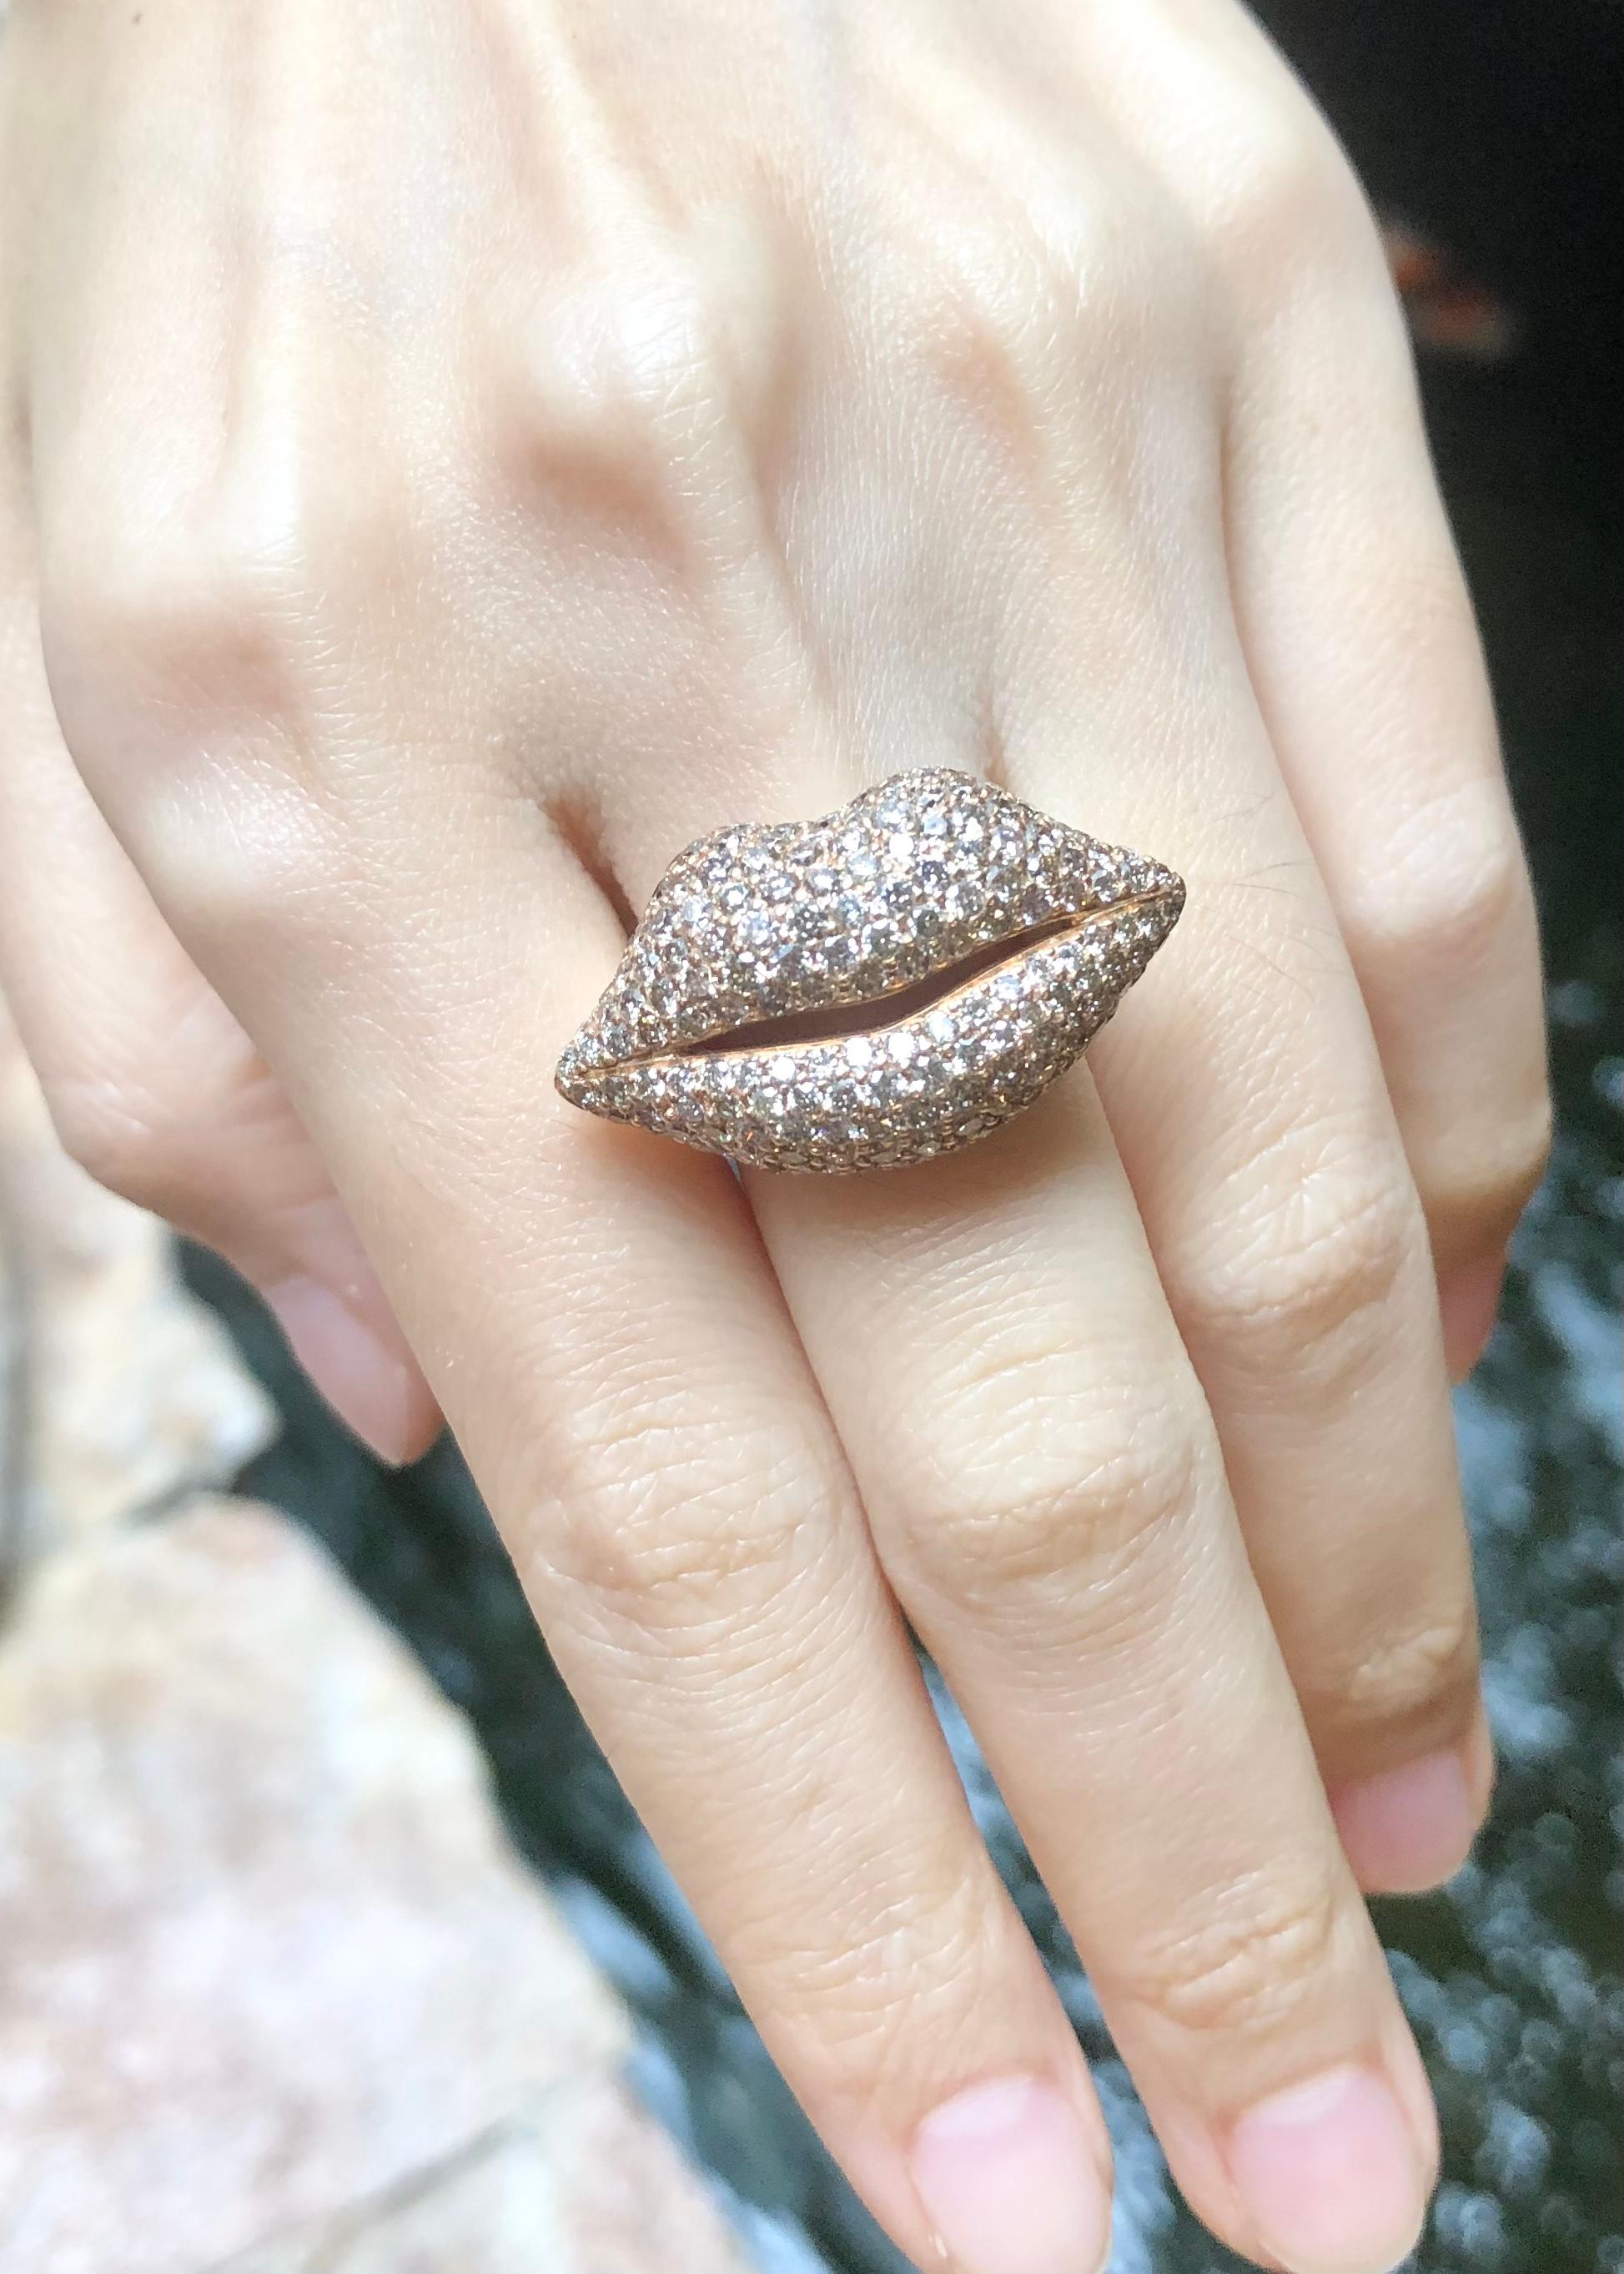 Brown Diamond 3.55 carats Ring set in 18K Rose Gold Settings

Width:  2.9 cm 
Length: 1.8 cm
Ring Size: 53
Total Weight: 13.02 grams

